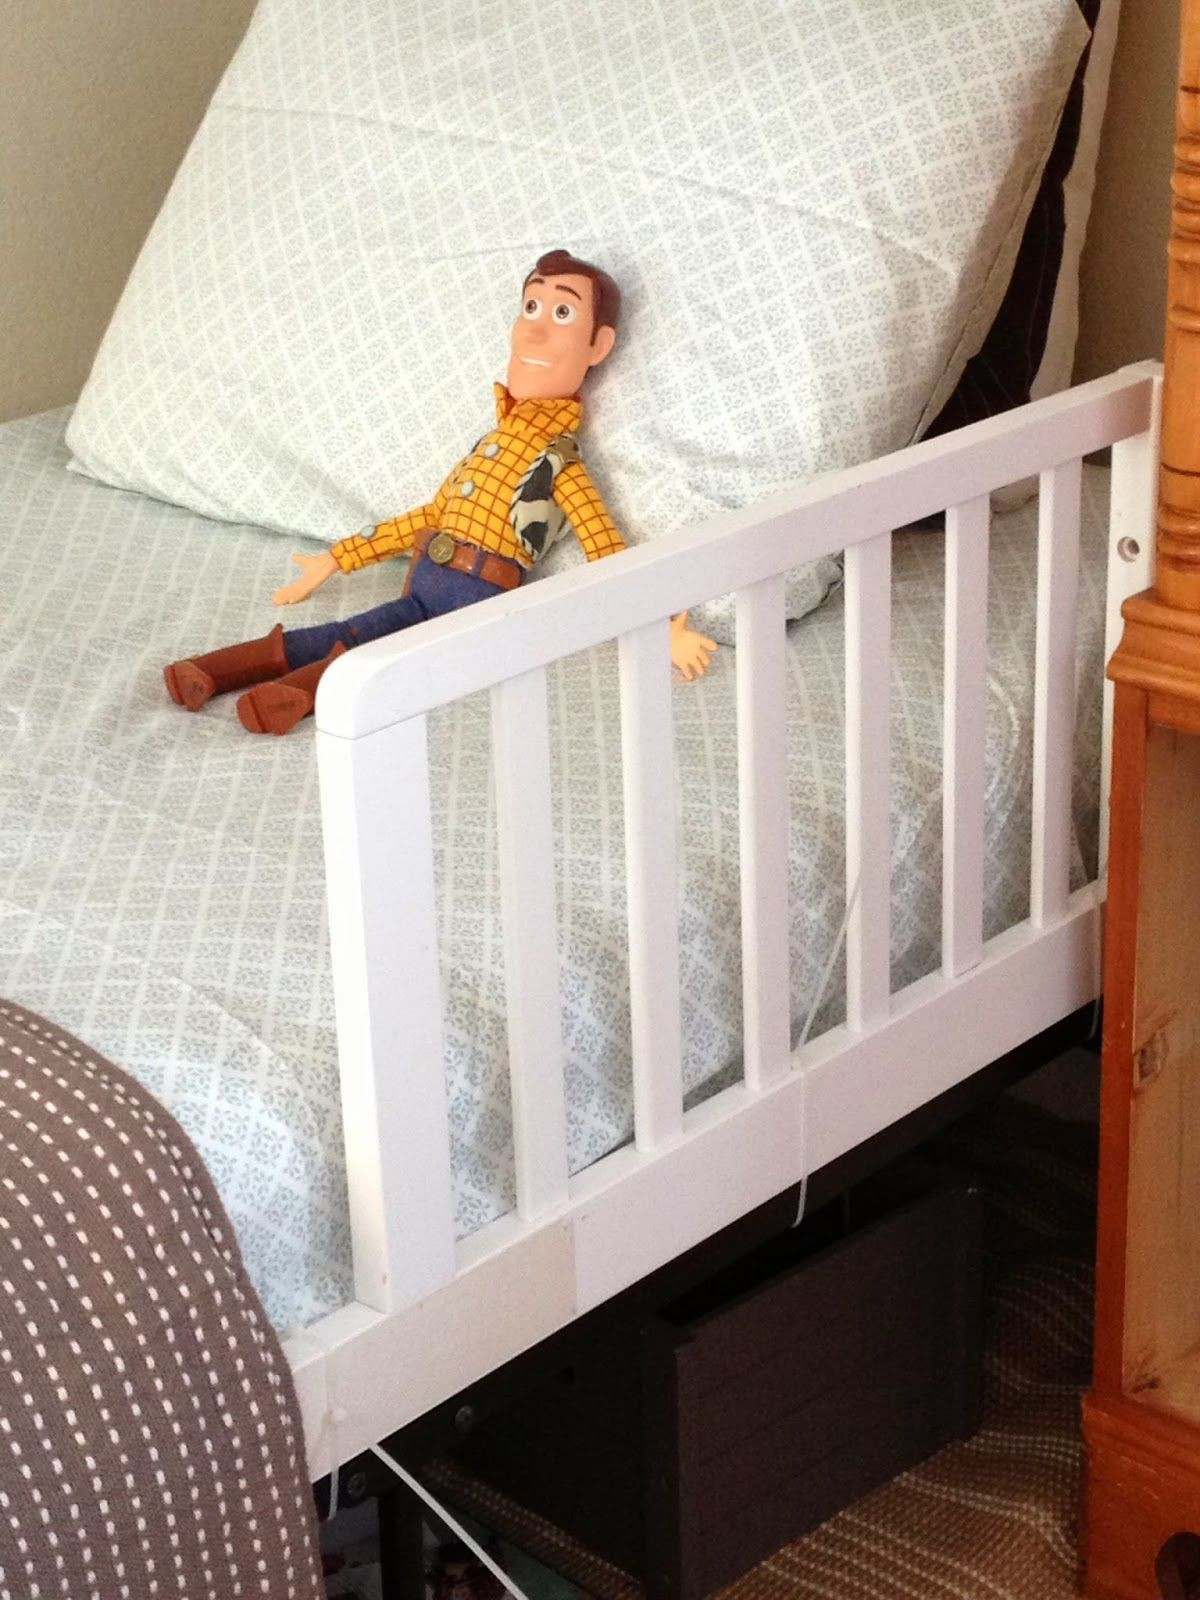 Toddler Bed Rail DIY
 Diy safety rail for a toddler bed in 2019